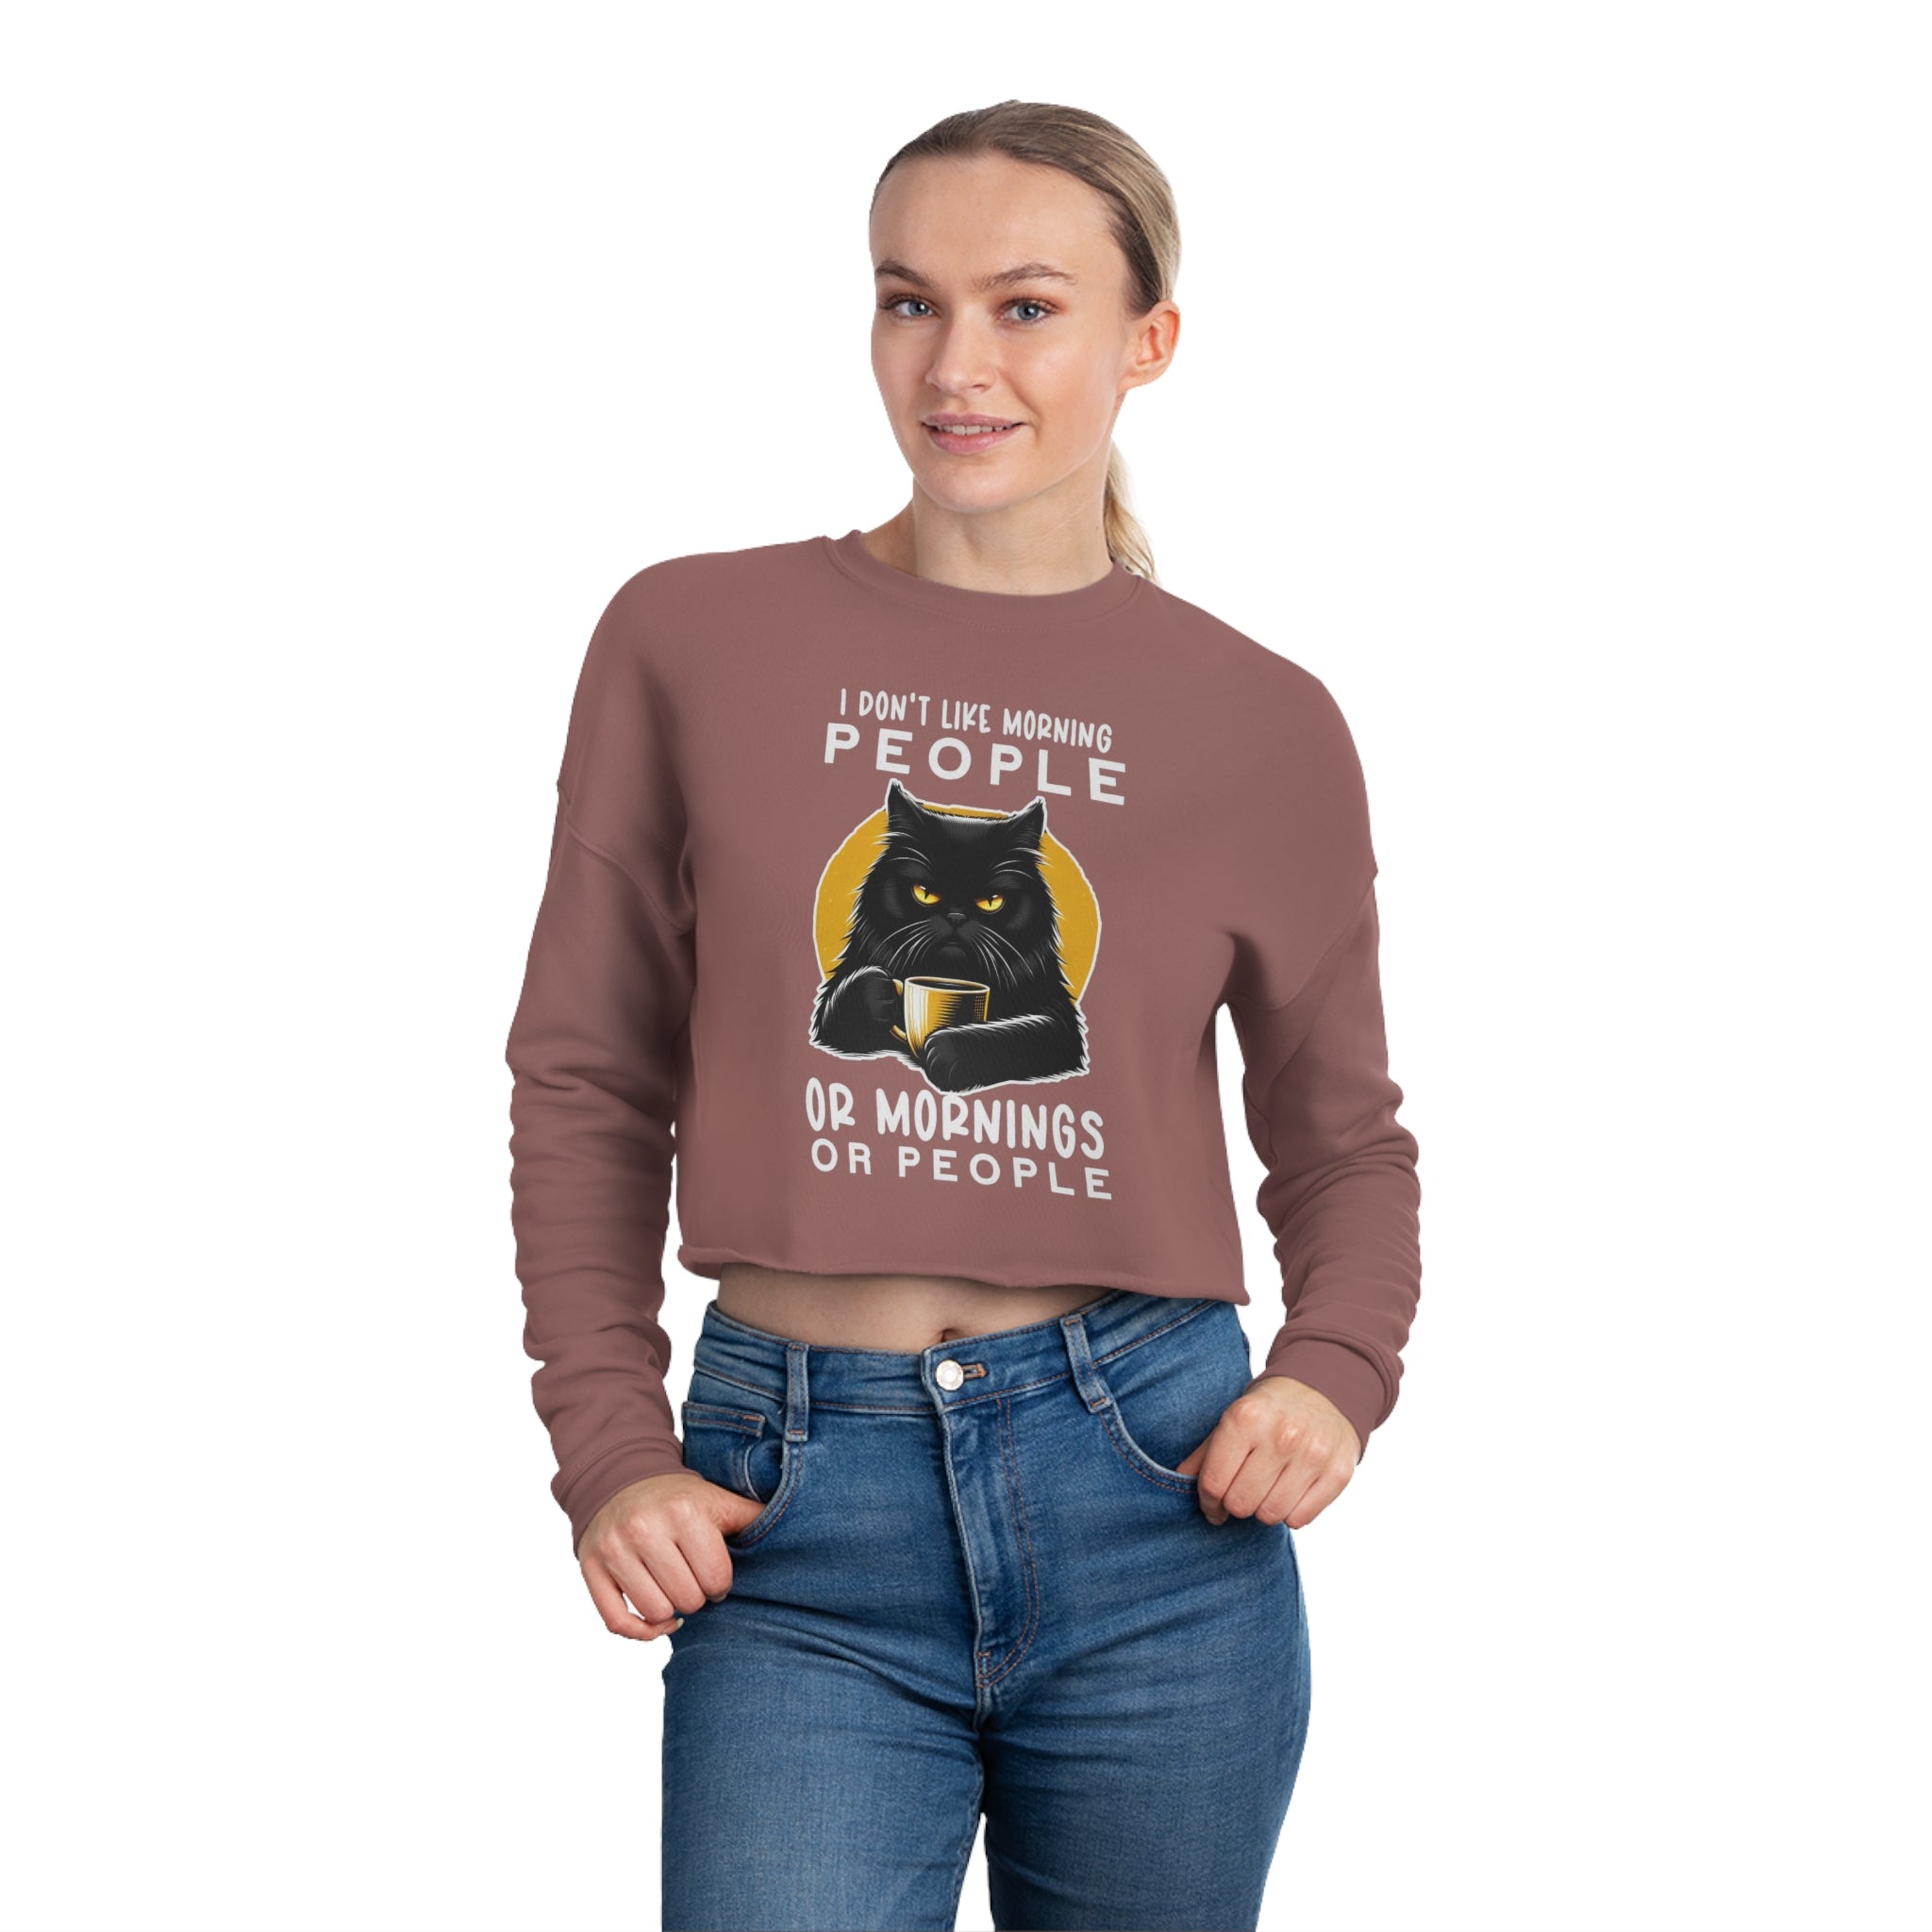 This image showcases a trendy women's cropped sweatshirt featuring the famous Grumpy Cat meme with the slogan “I Don't Like People...Grumpy Cat Coffee." The design emphasizes a playful yet relatable sentiment for those whose mornings must start with coffee. The sweatshirt's cropped style adds a fashionable edge, making it an ideal choice for those looking to combine comfort with a statement piece.